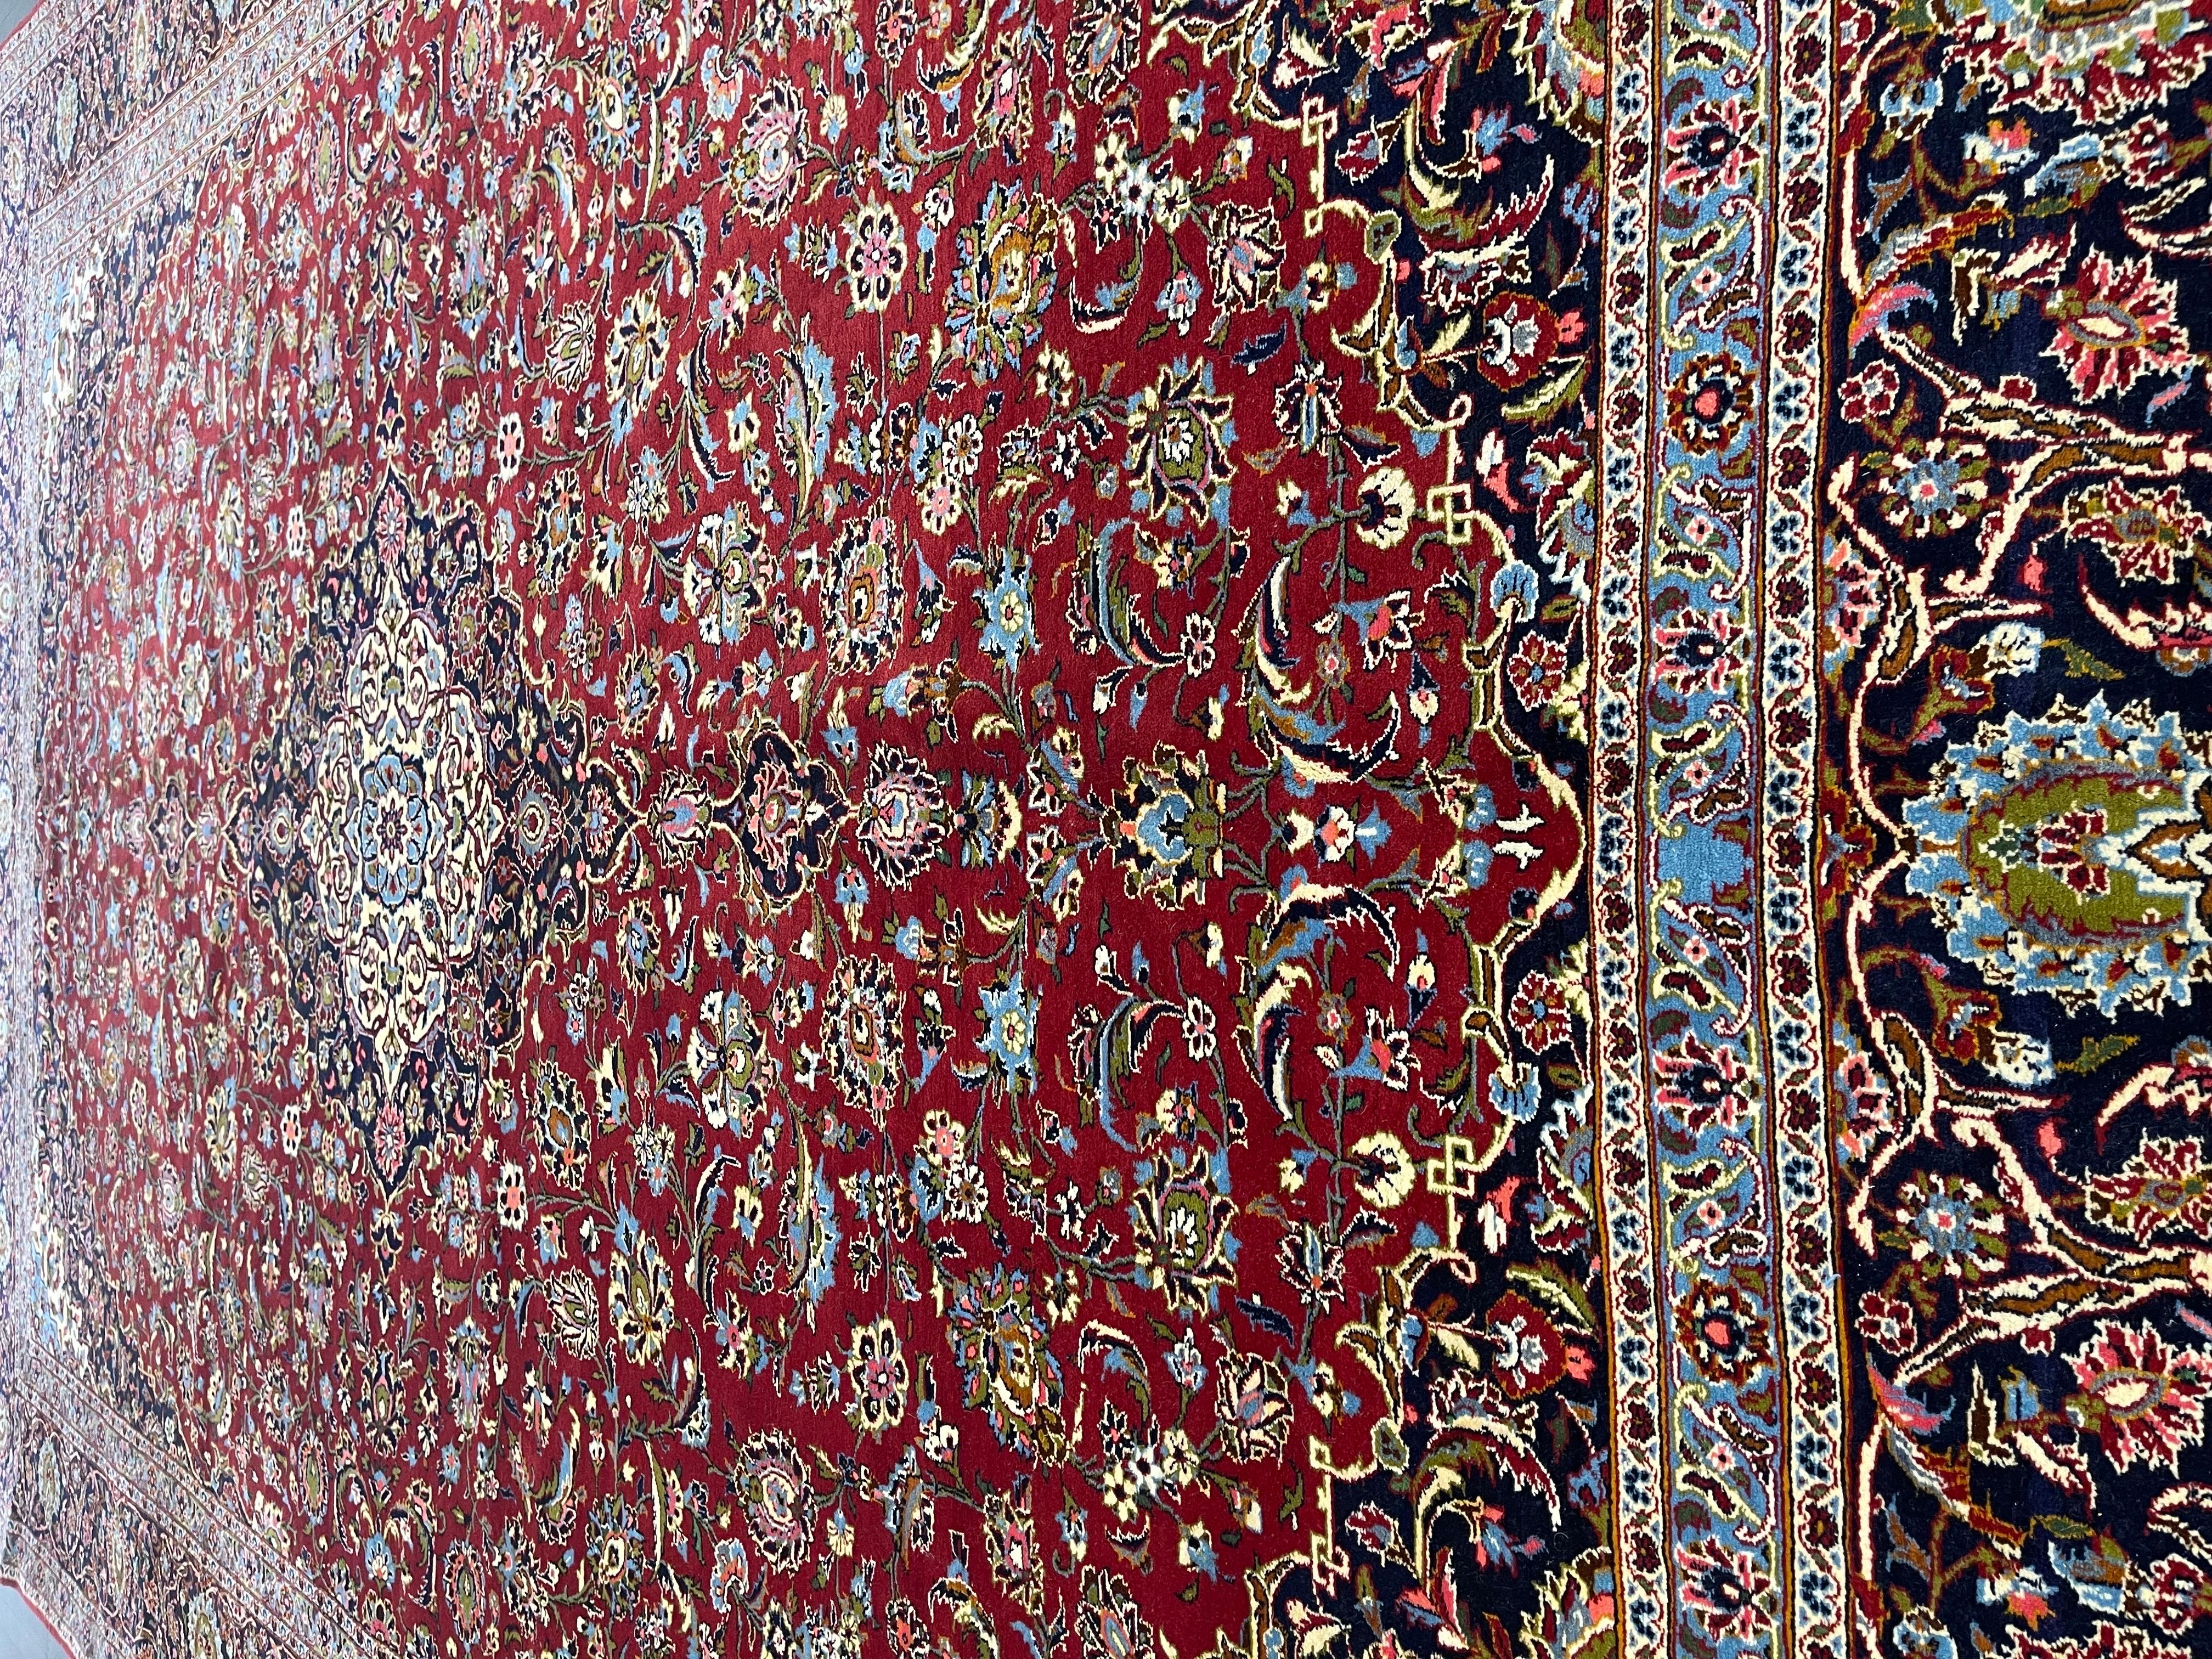 A classic Persian carpet hand woven by skillful weavers of Kashan, a major rug making center in western Iran. Featuring a Tomato red field decorated with flowers and leaves around a center medallion in navy blue and ivory. The knot count of this